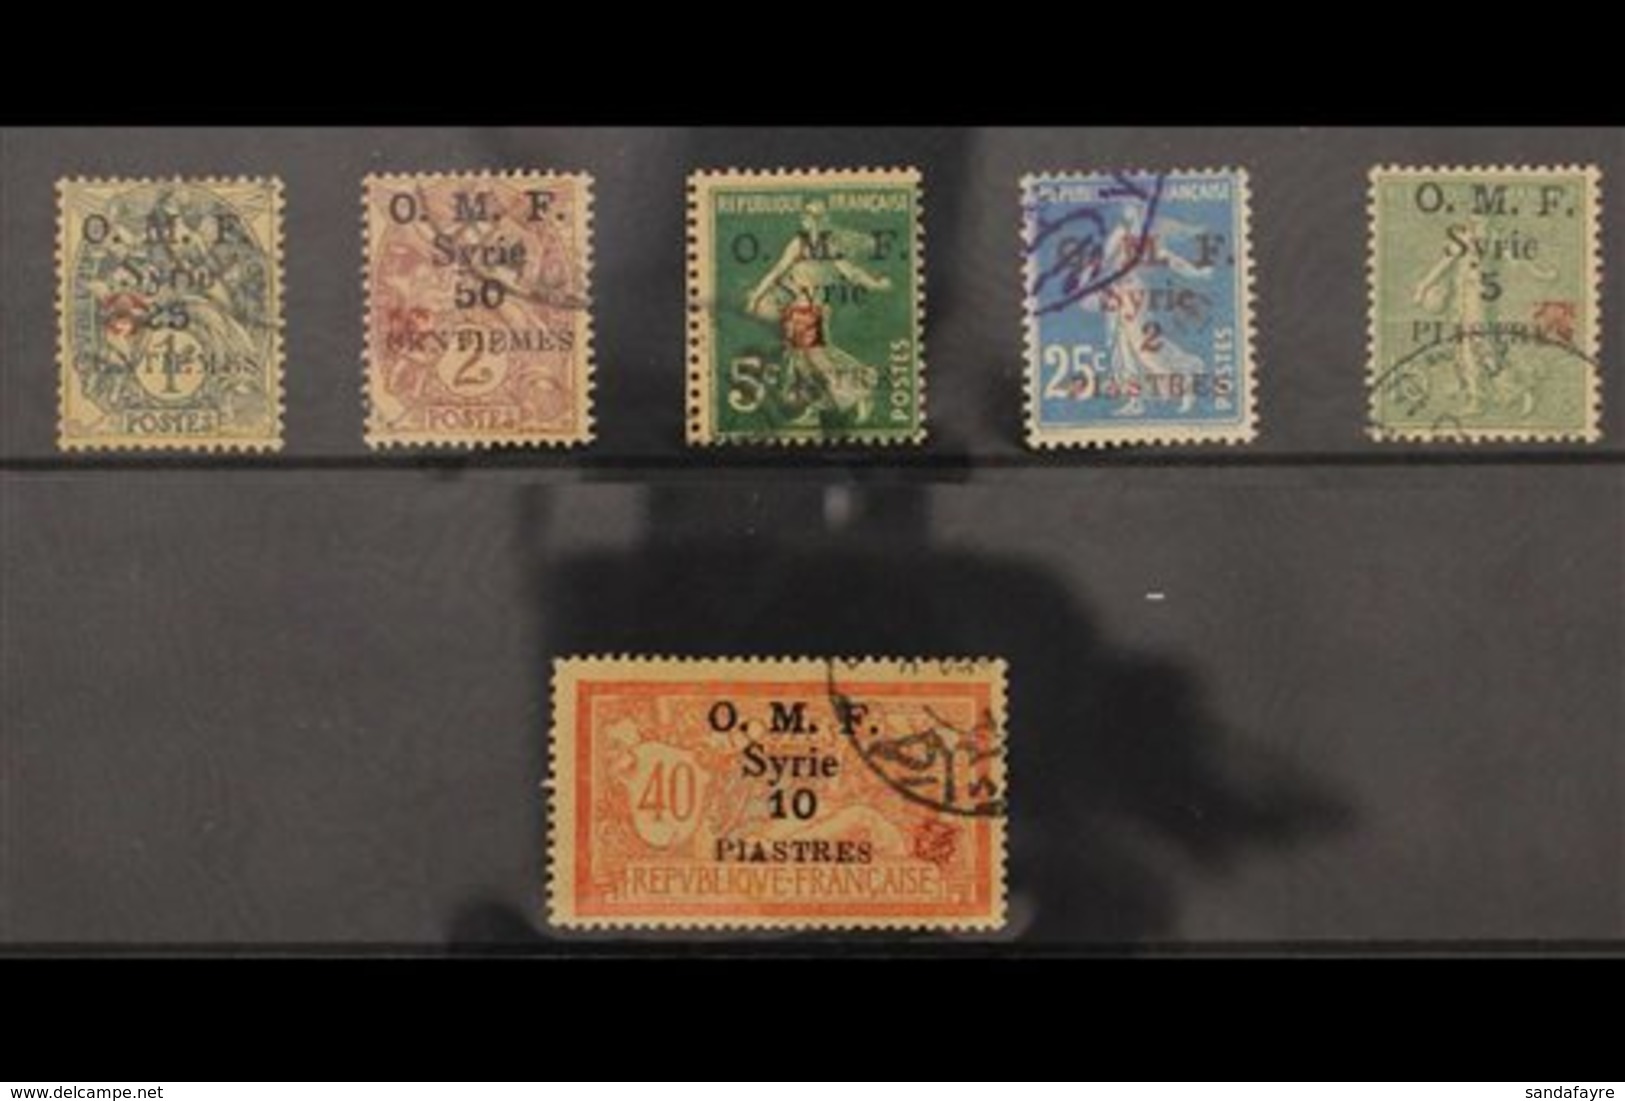 1920 Aleppo Vilayet Overprint With Rosette In Red, Set To 10p On 40c, SG 49b/53b, Fine Used. (6 Stamps) For More Images, - Syria